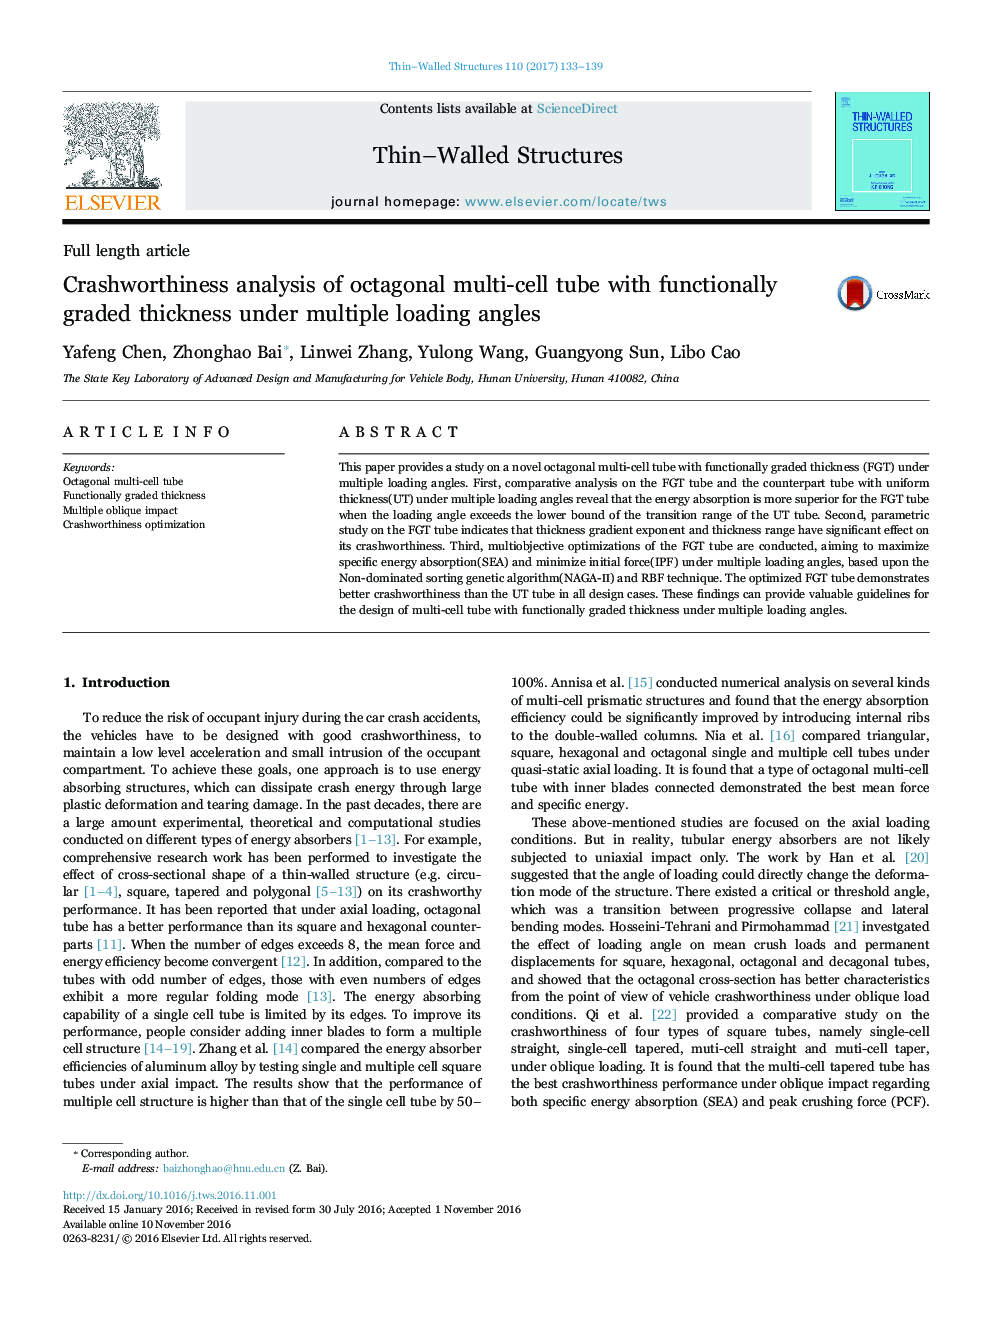 Crashworthiness analysis of octagonal multi-cell tube with functionally graded thickness under multiple loading angles